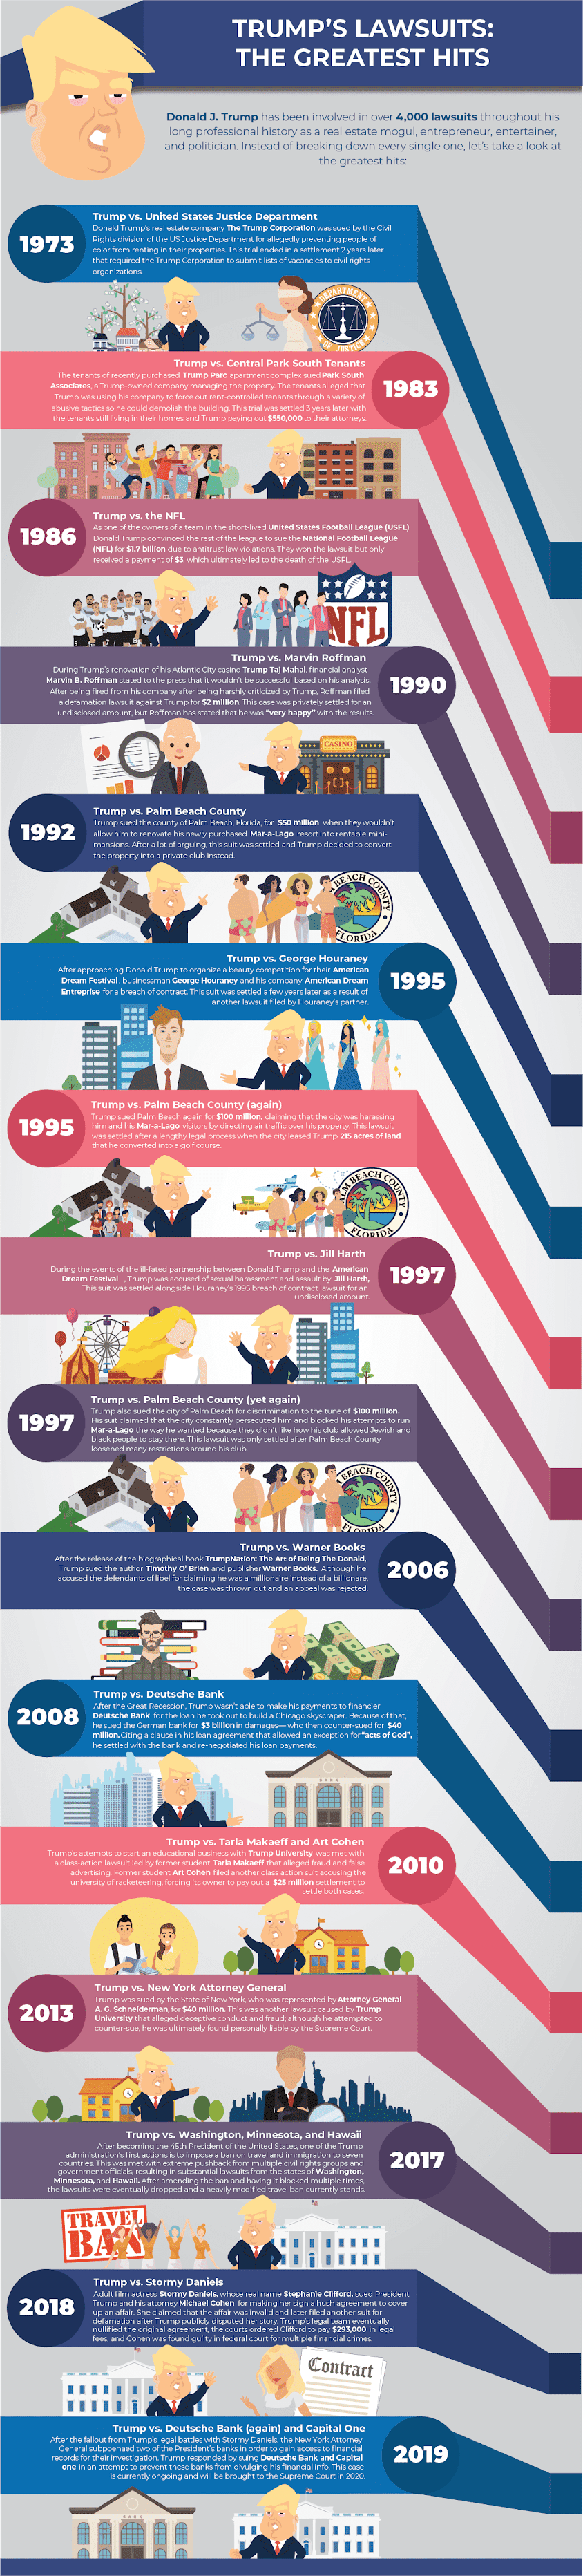 Trump’s Lawsuits: The Greatest Hits #infographic